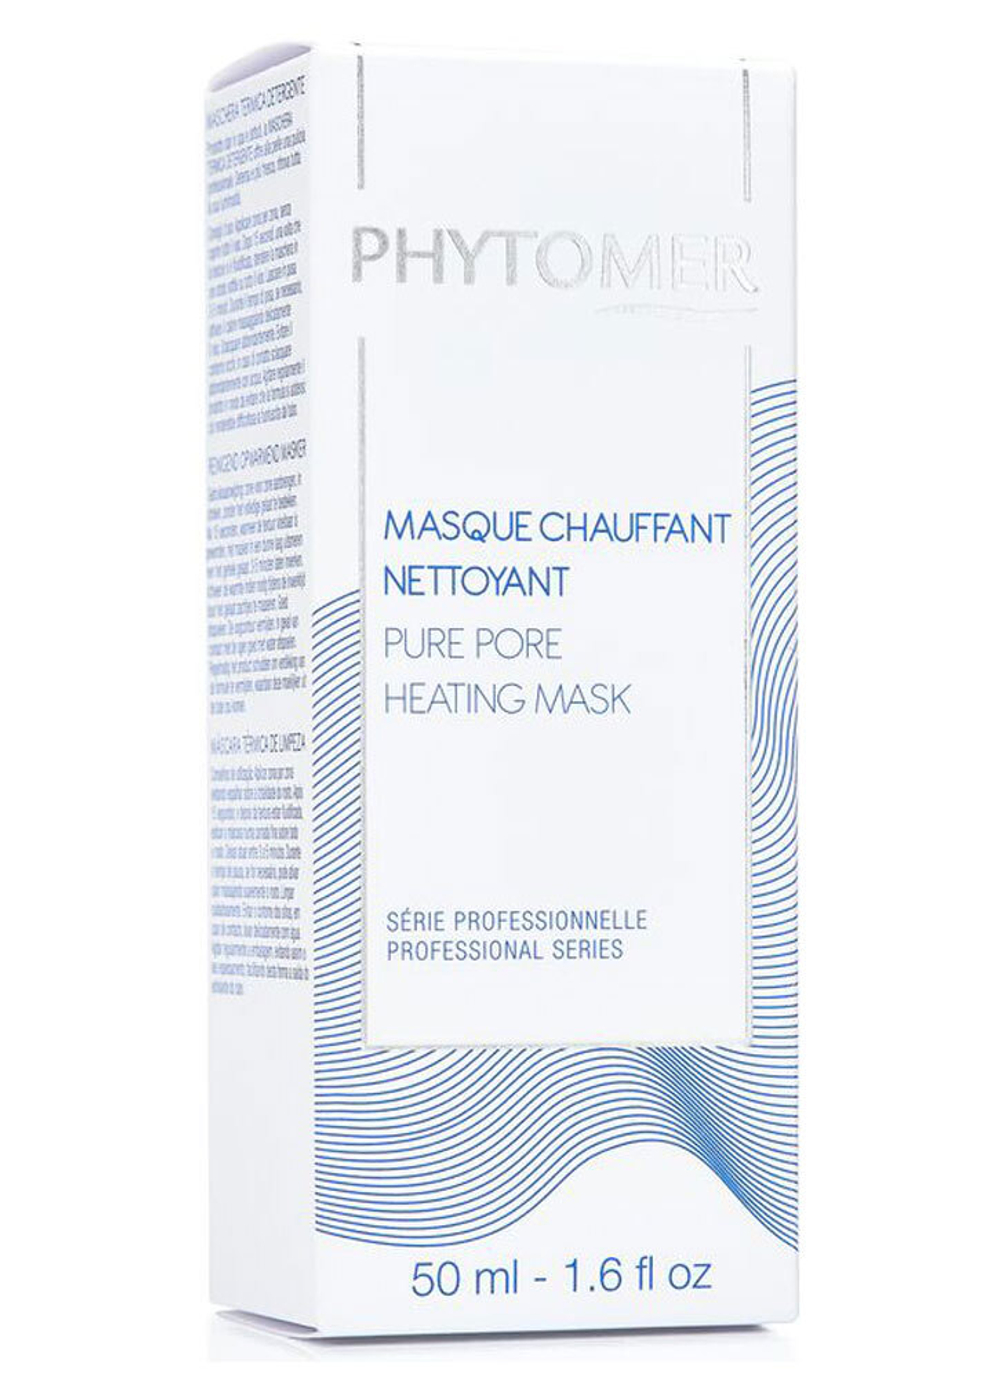 PHYTOMER Pure Pore Heating Mask limited edition